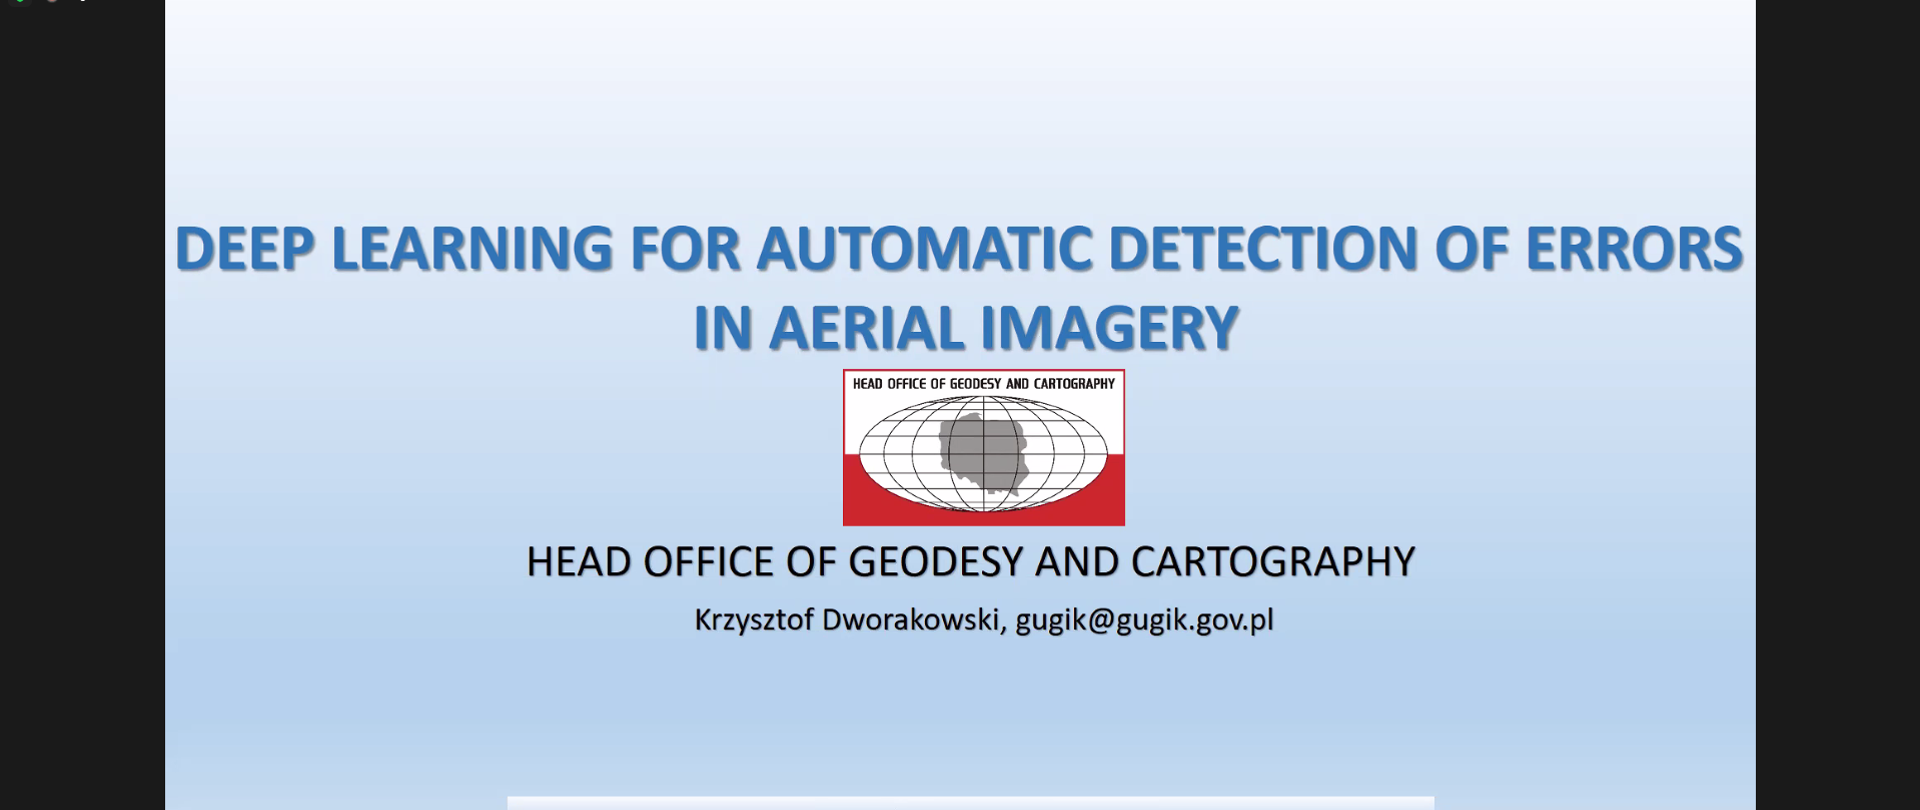 The screenshot of the title slide presented by GUGIK during the workshop.